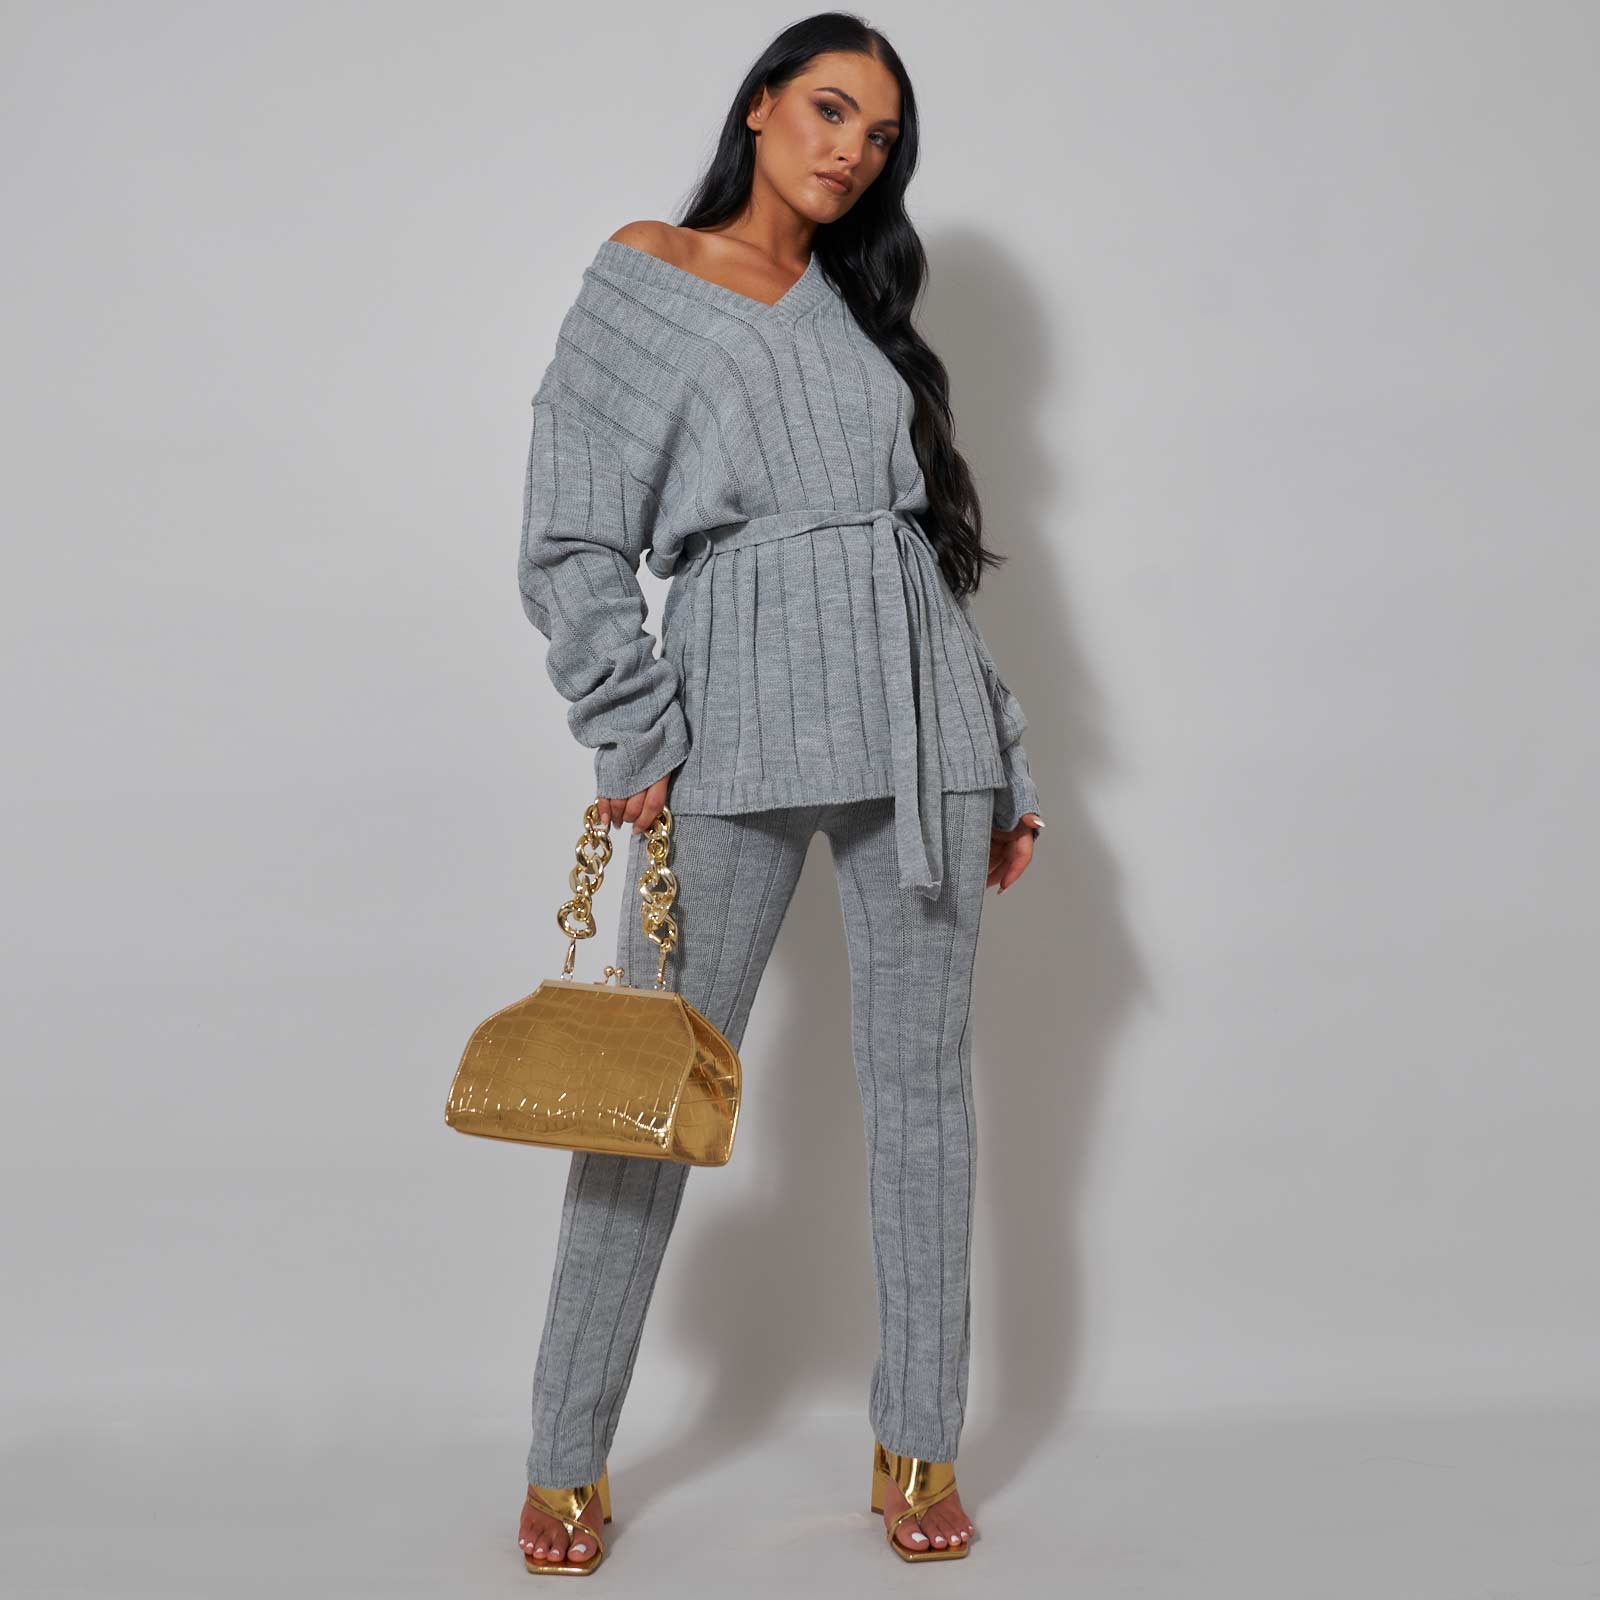 Knitted Waist Ribbed Jumper And Legging Co Ord In Grey UK Medium/Large M/L, Grey